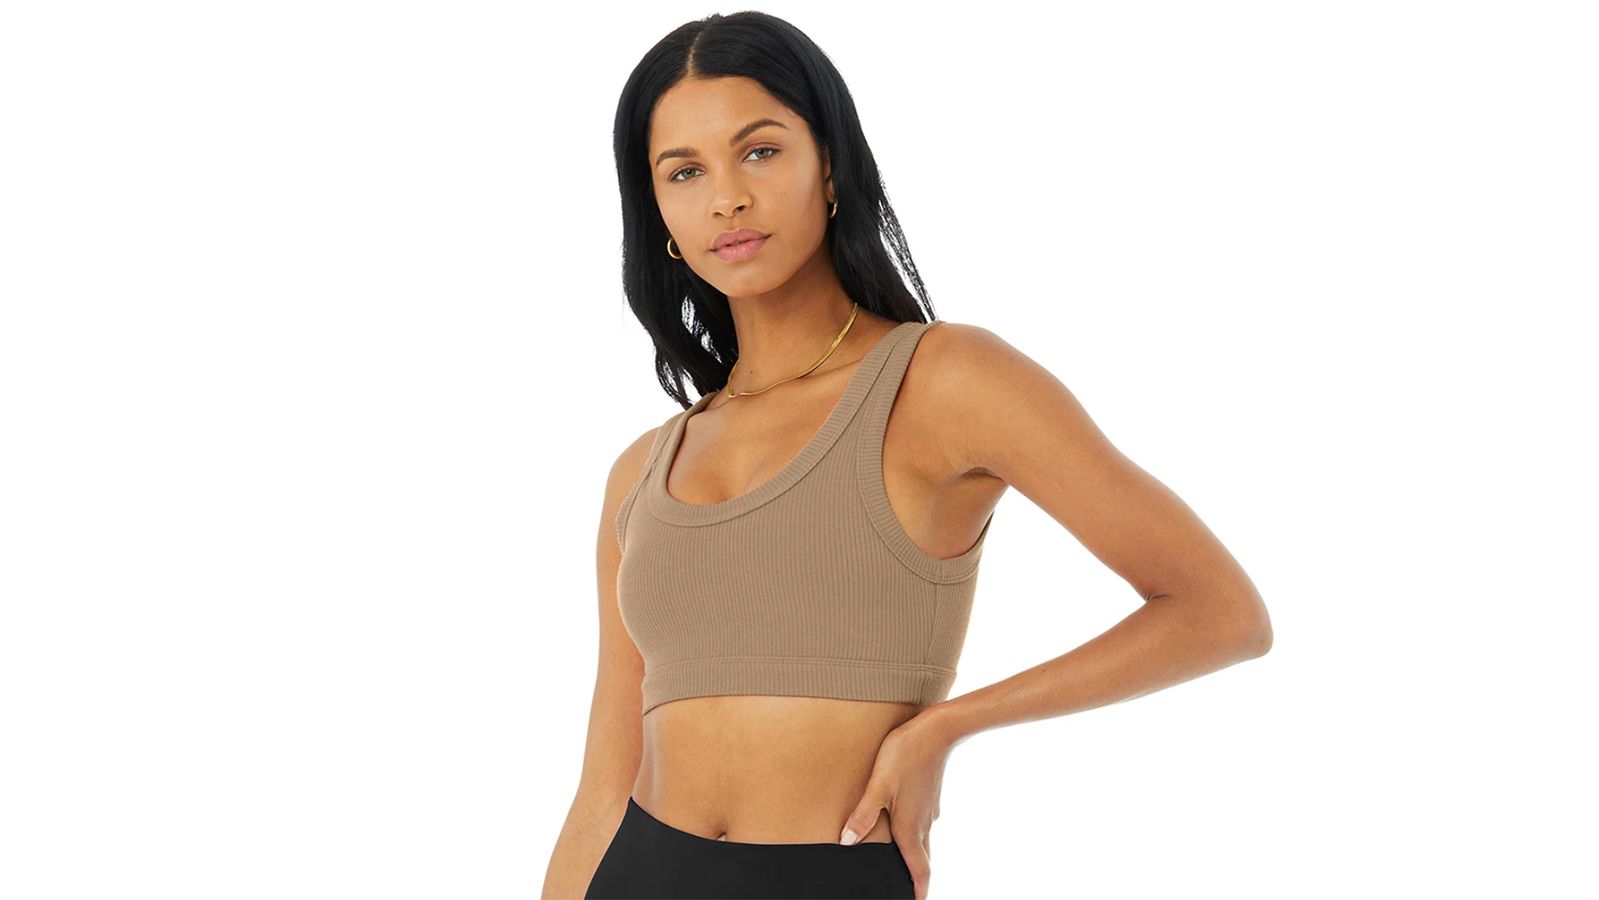 Best workout clothes for women